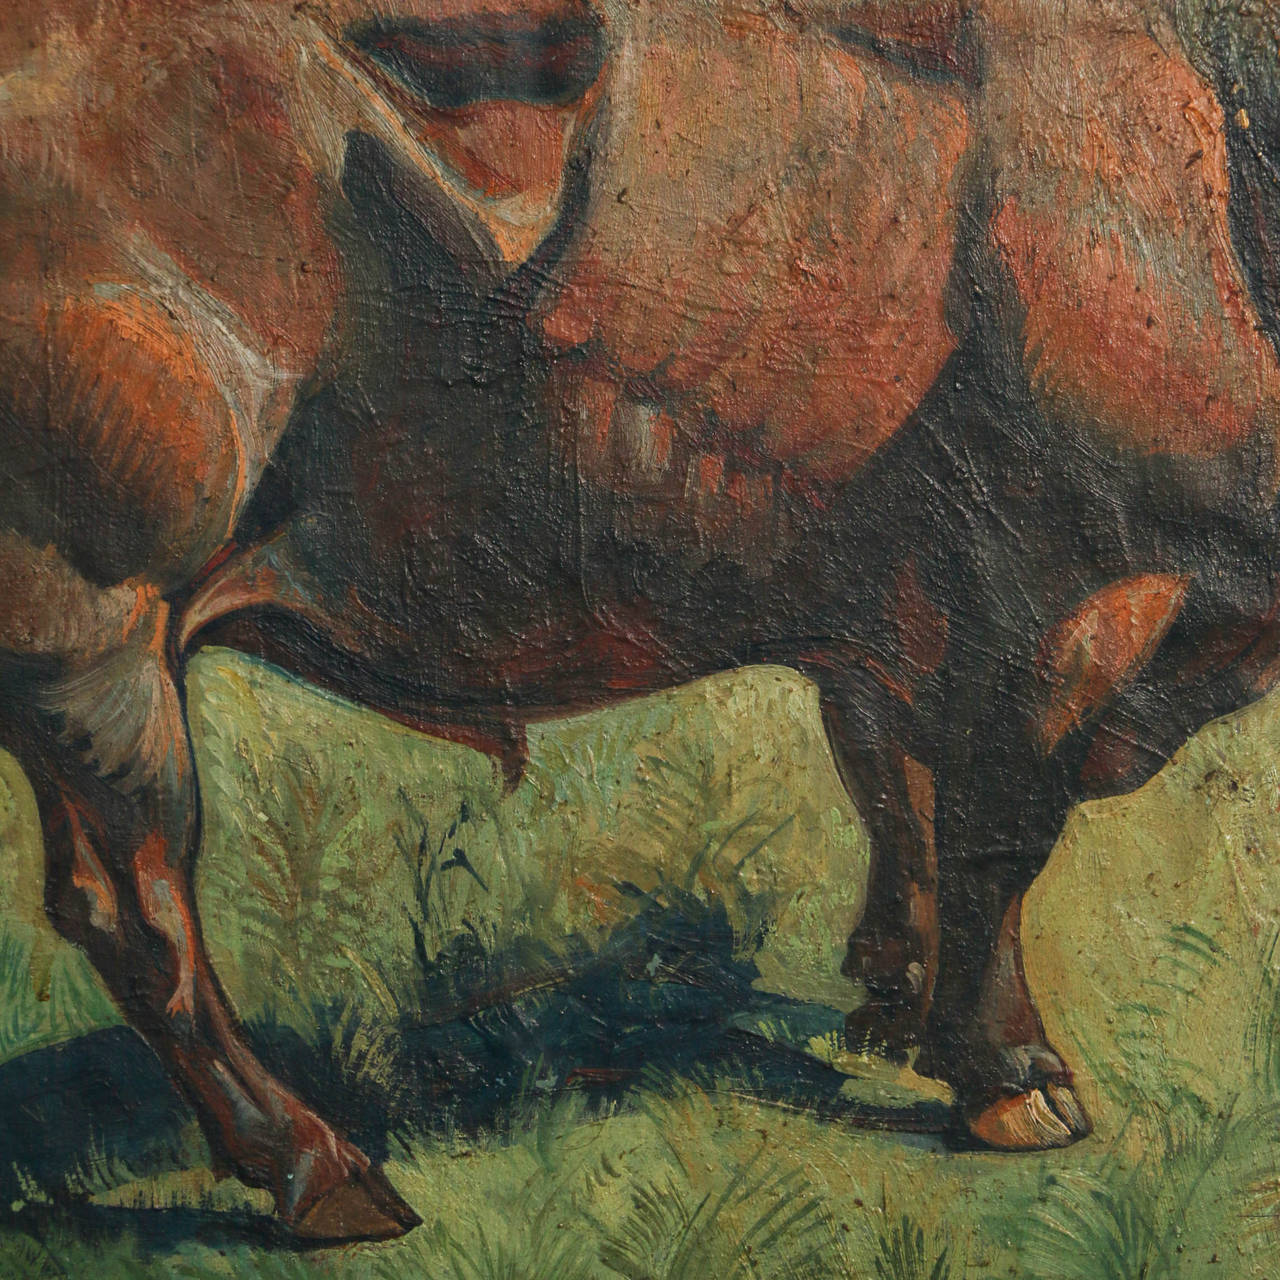 Original Oil on Canvas painting of a lone bull in a field, signed and dated in the lower left Gunnar L.,  1922. While there are some 